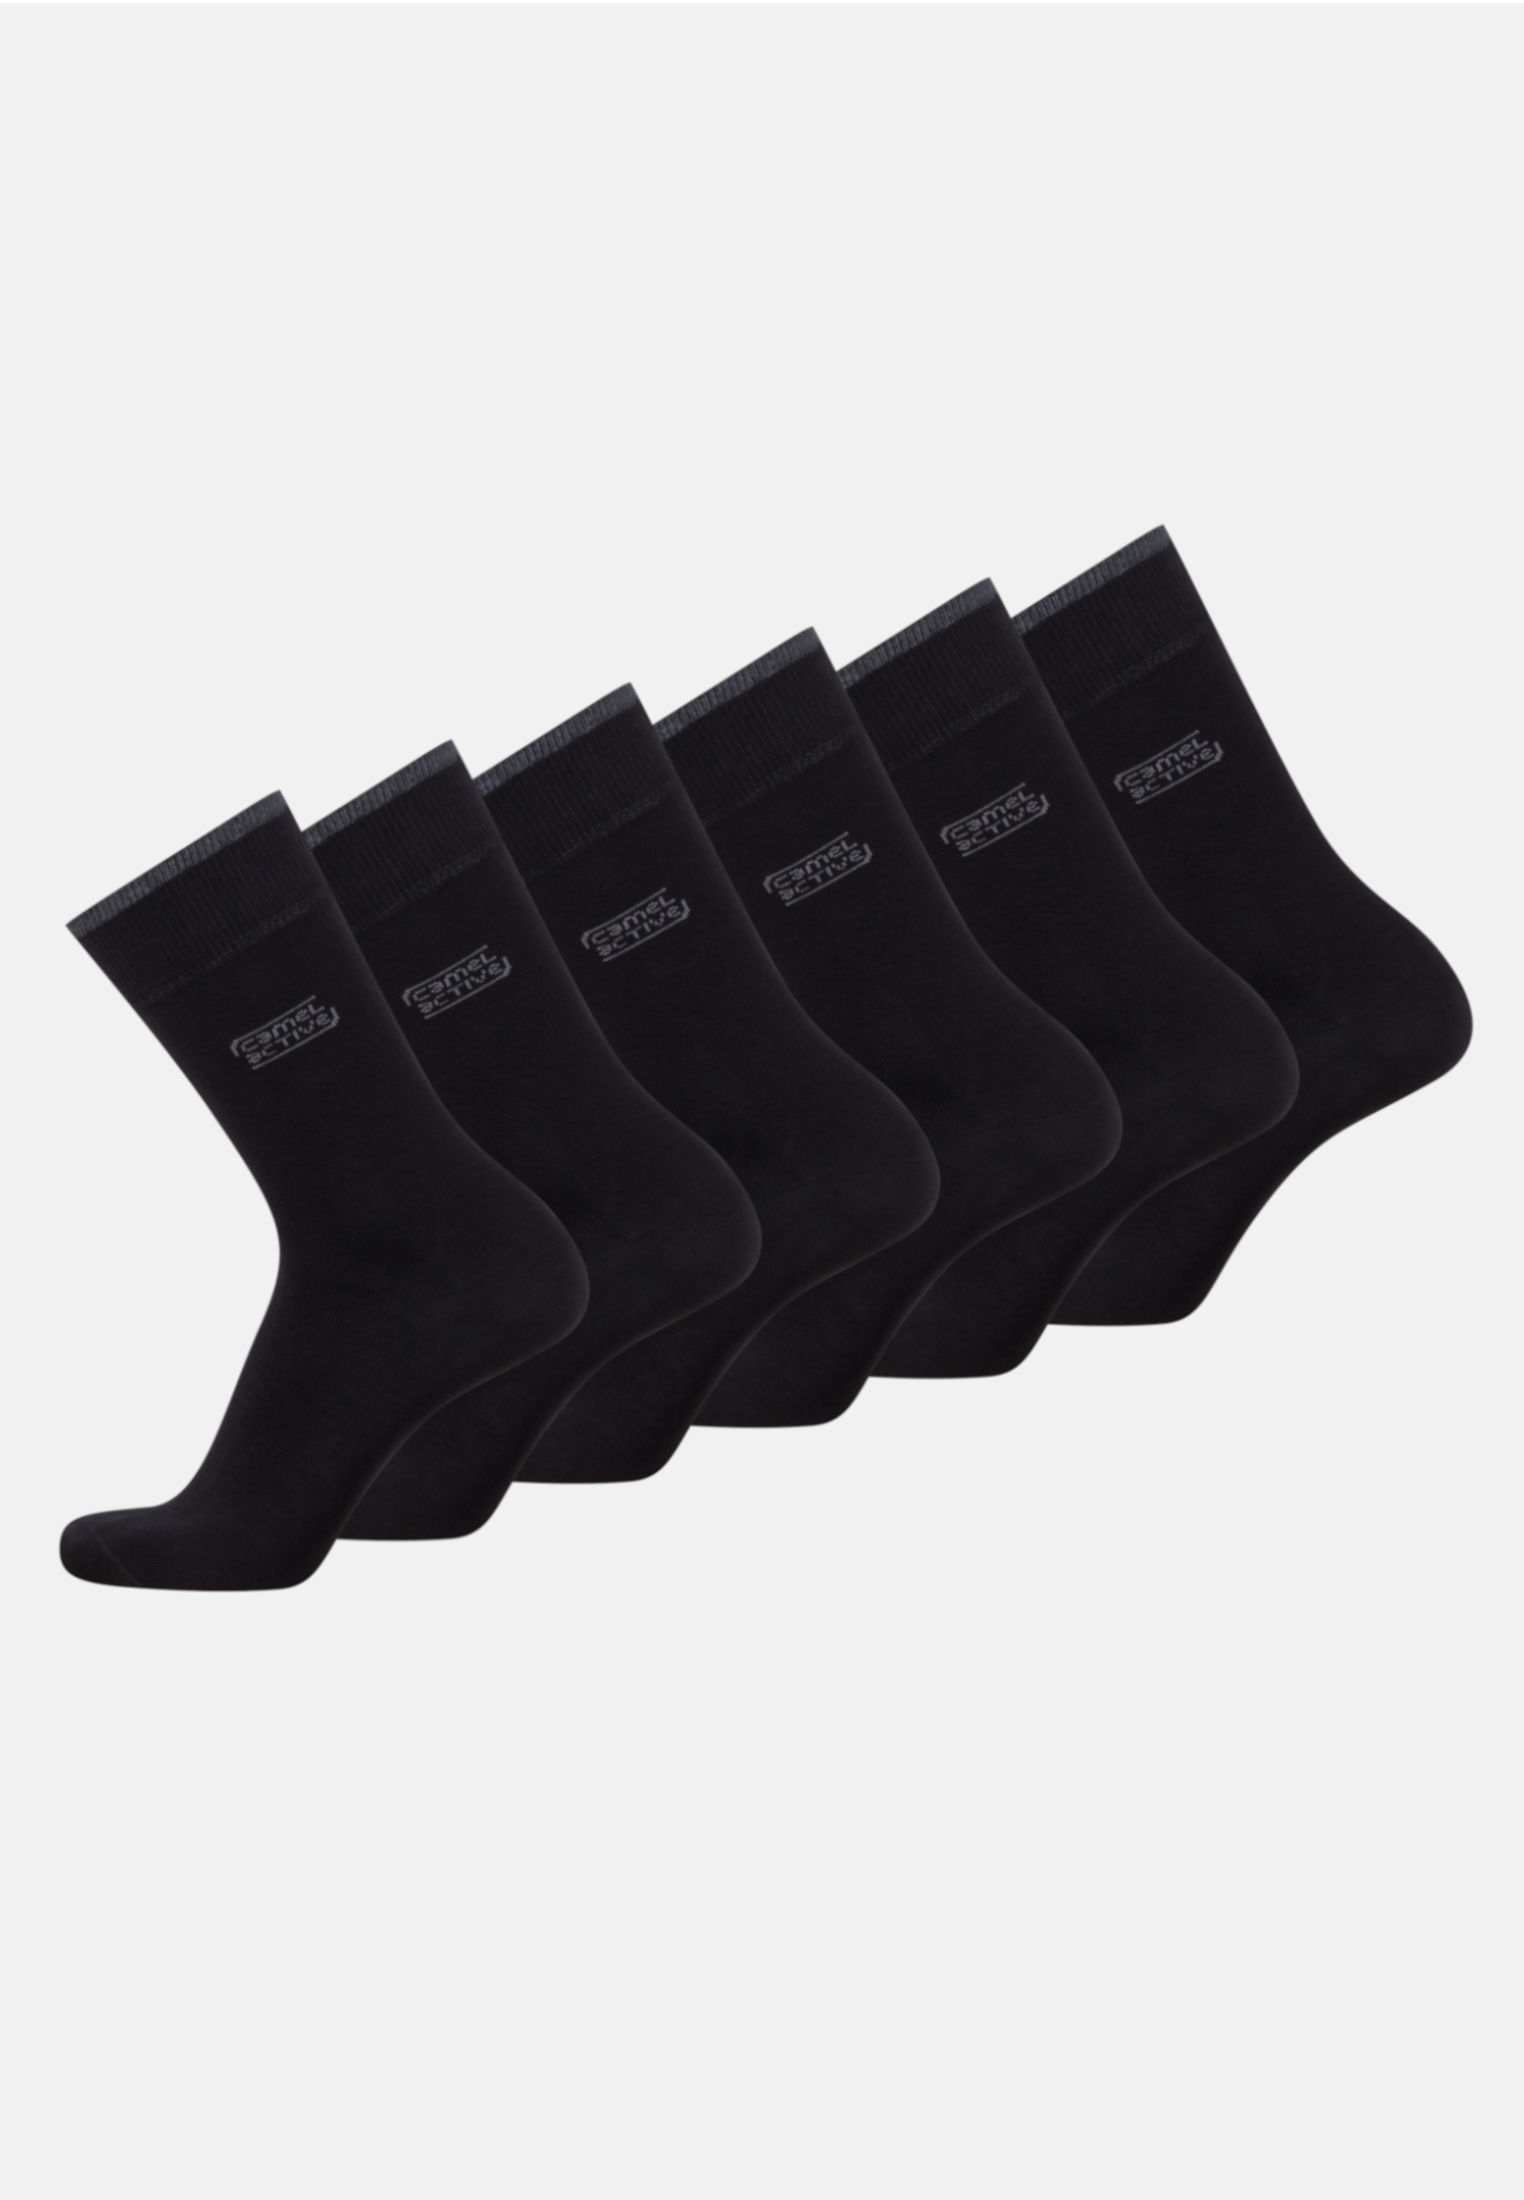 Camel Active Cotton socks in a pack of 6